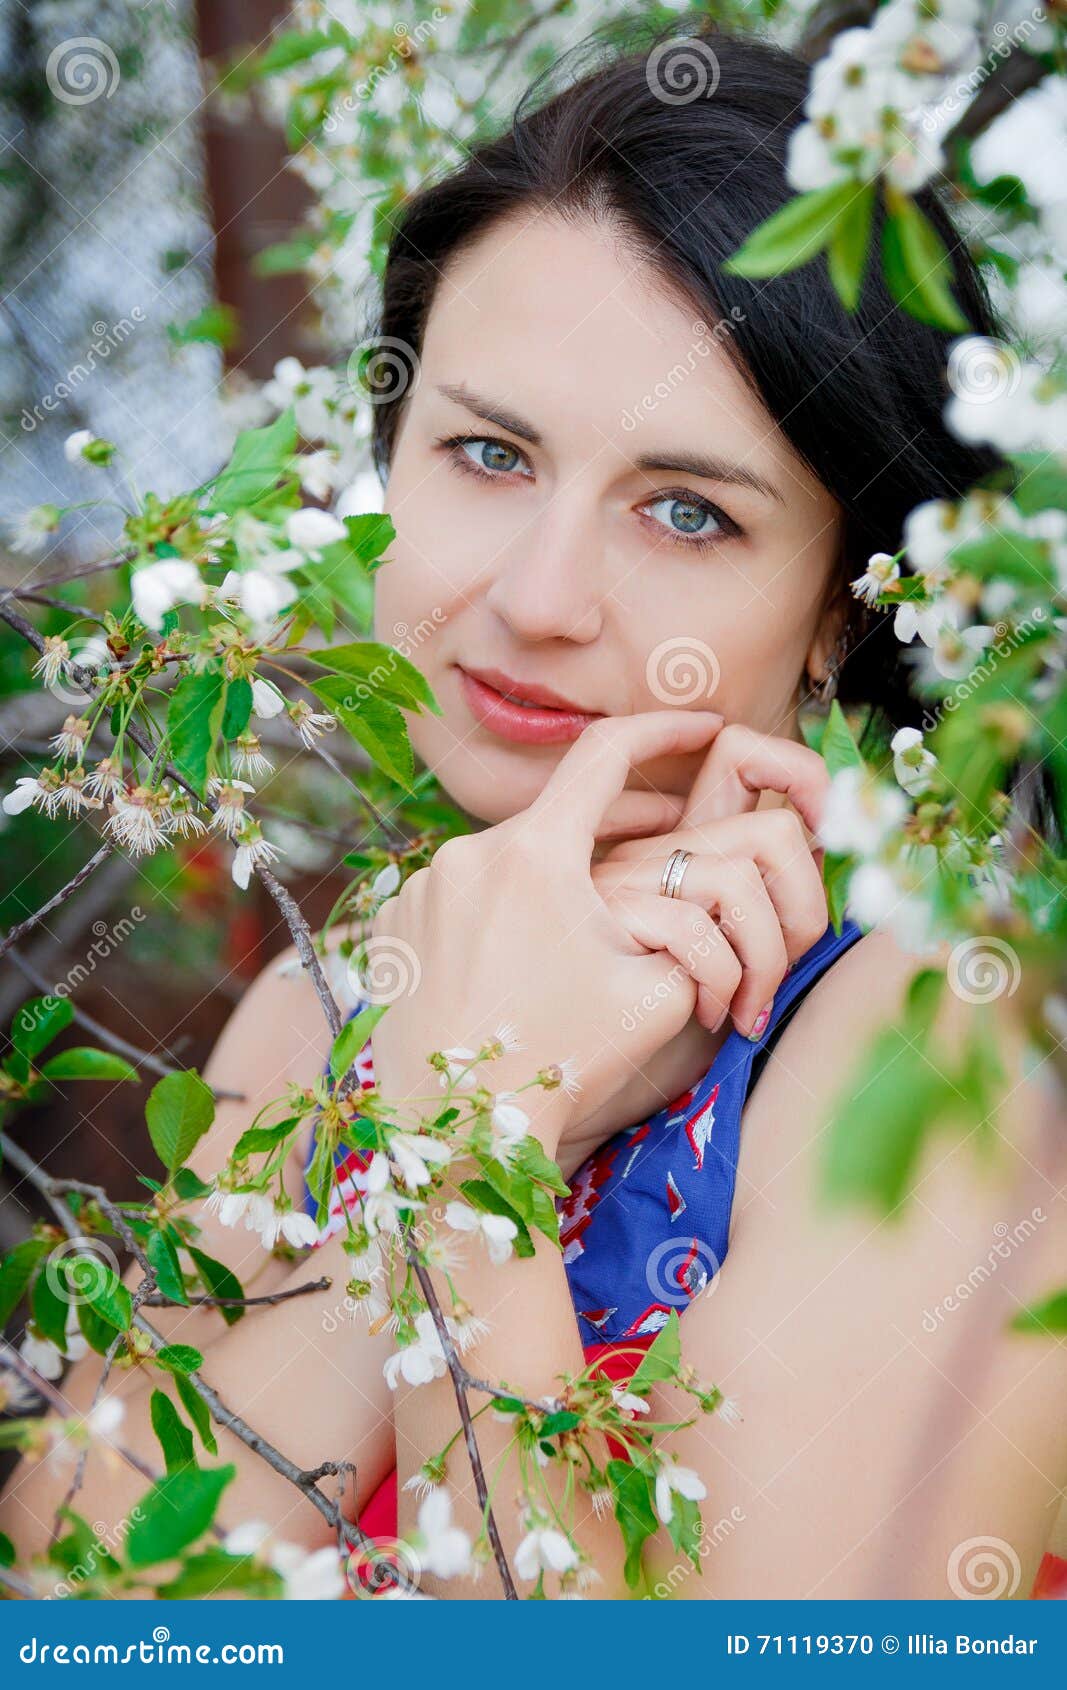 Girl among the Blooming Trees Stock Photo - Image of pretty, nature ...